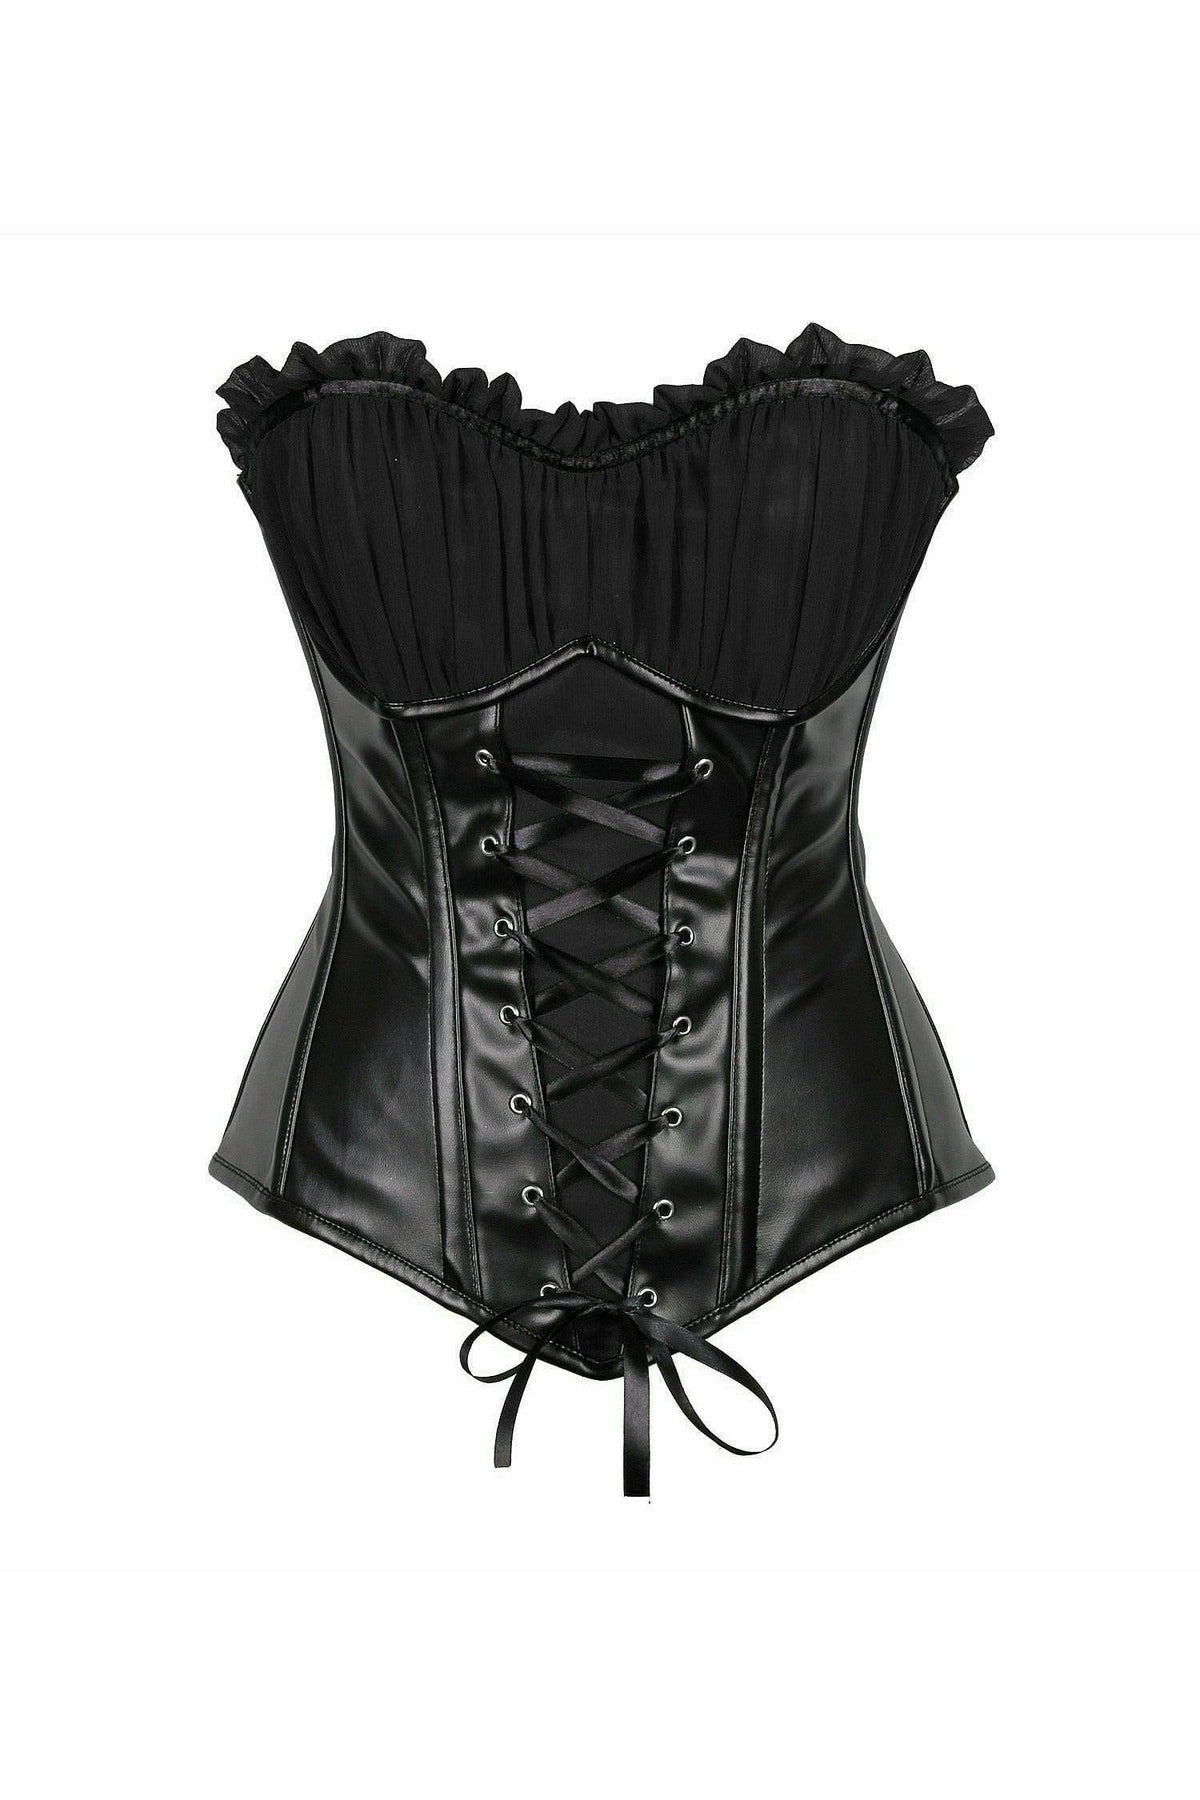 Daisy Corsets Top Drawer Black Faux Leather Lace-Up Steel Boned Corset